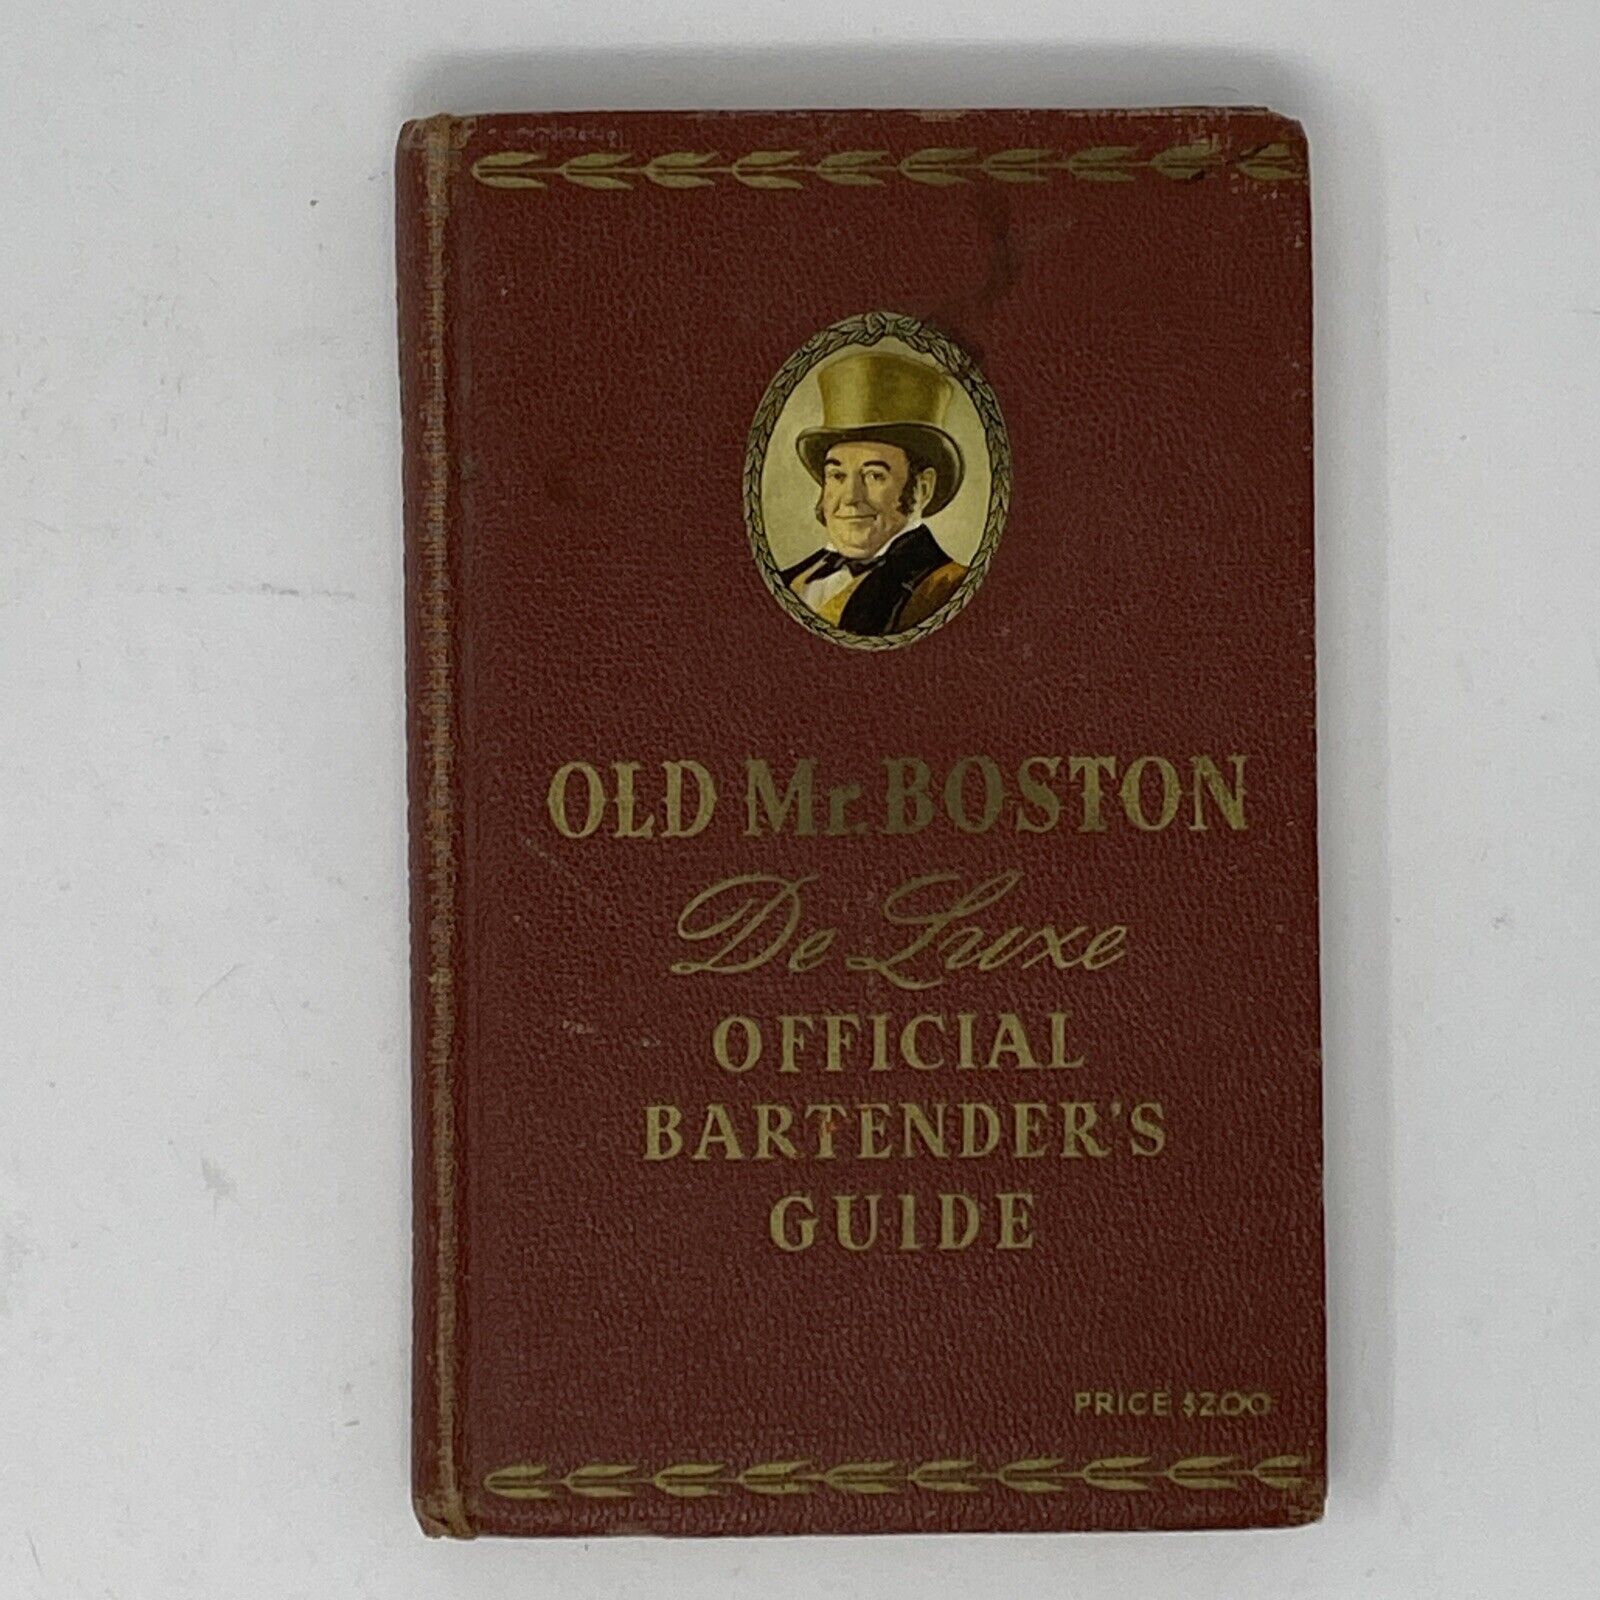 1949 8th Printing Old Mr Boston De Luxe Official Bartenders Guide Hardback Book